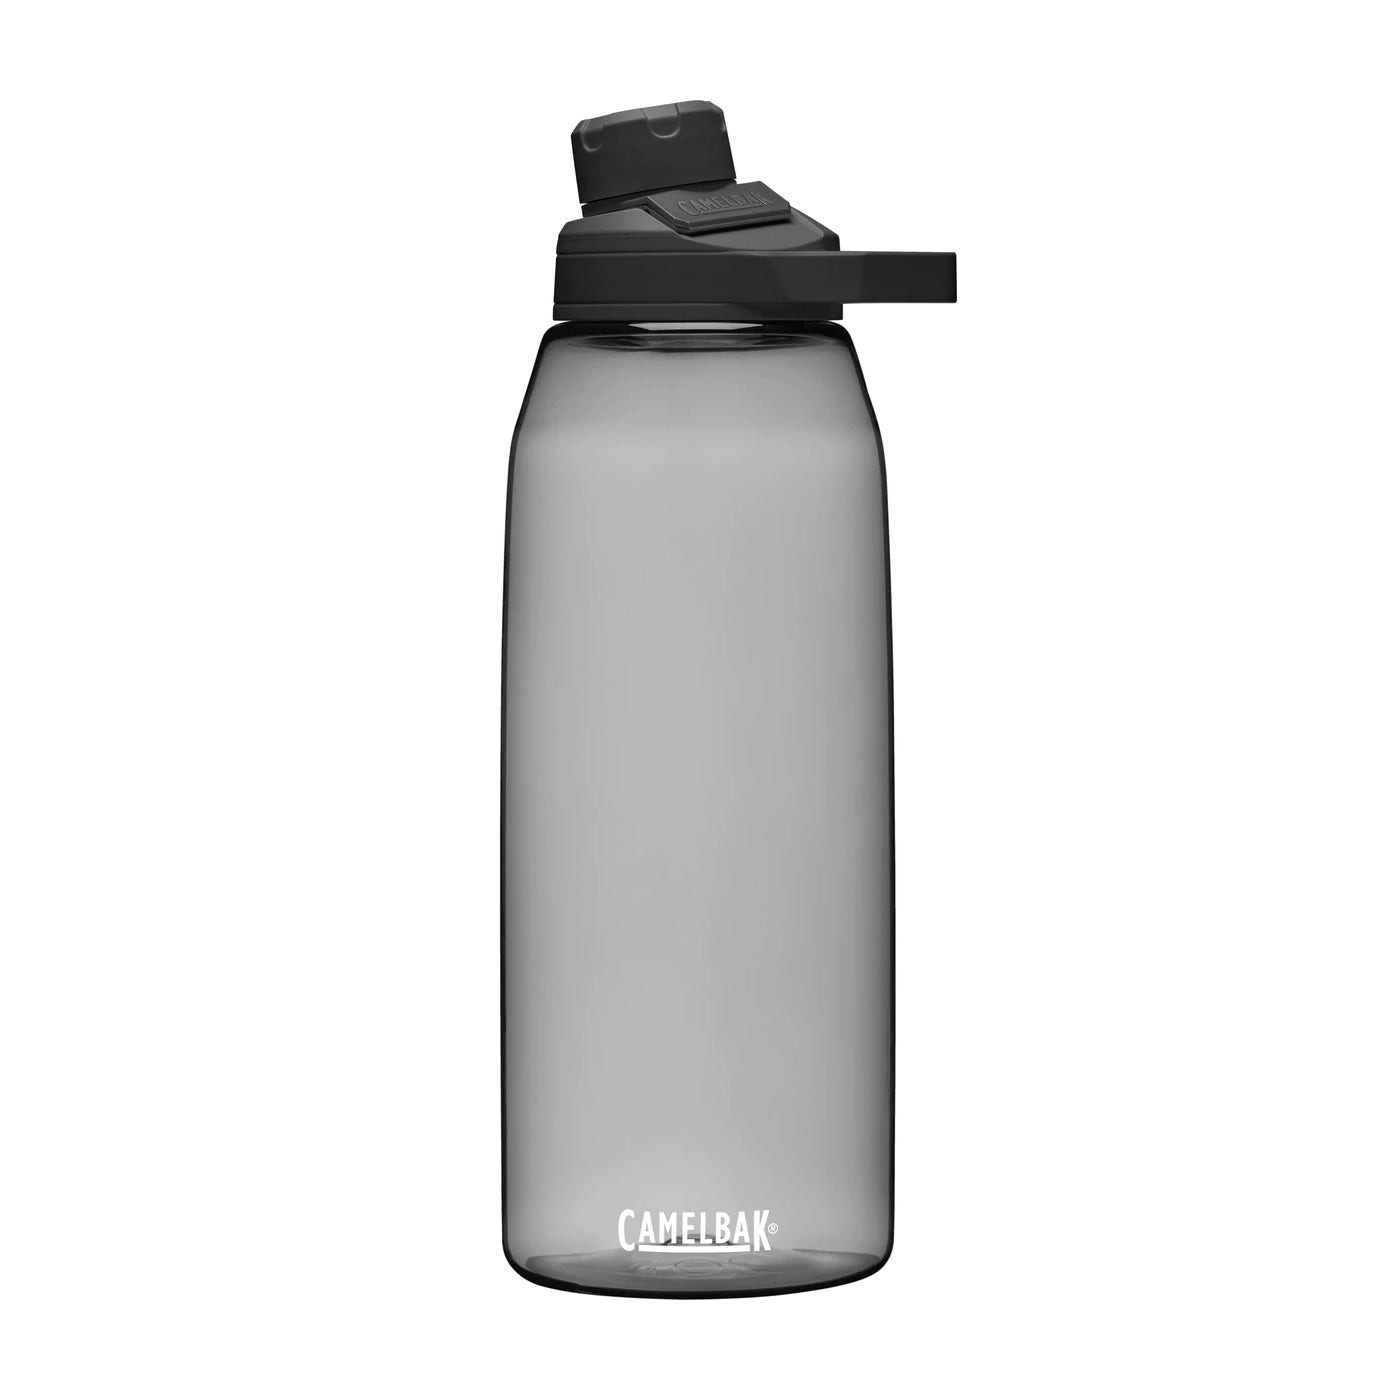 Camelbak Chute Mag Bottle 1.5L in Charcoal